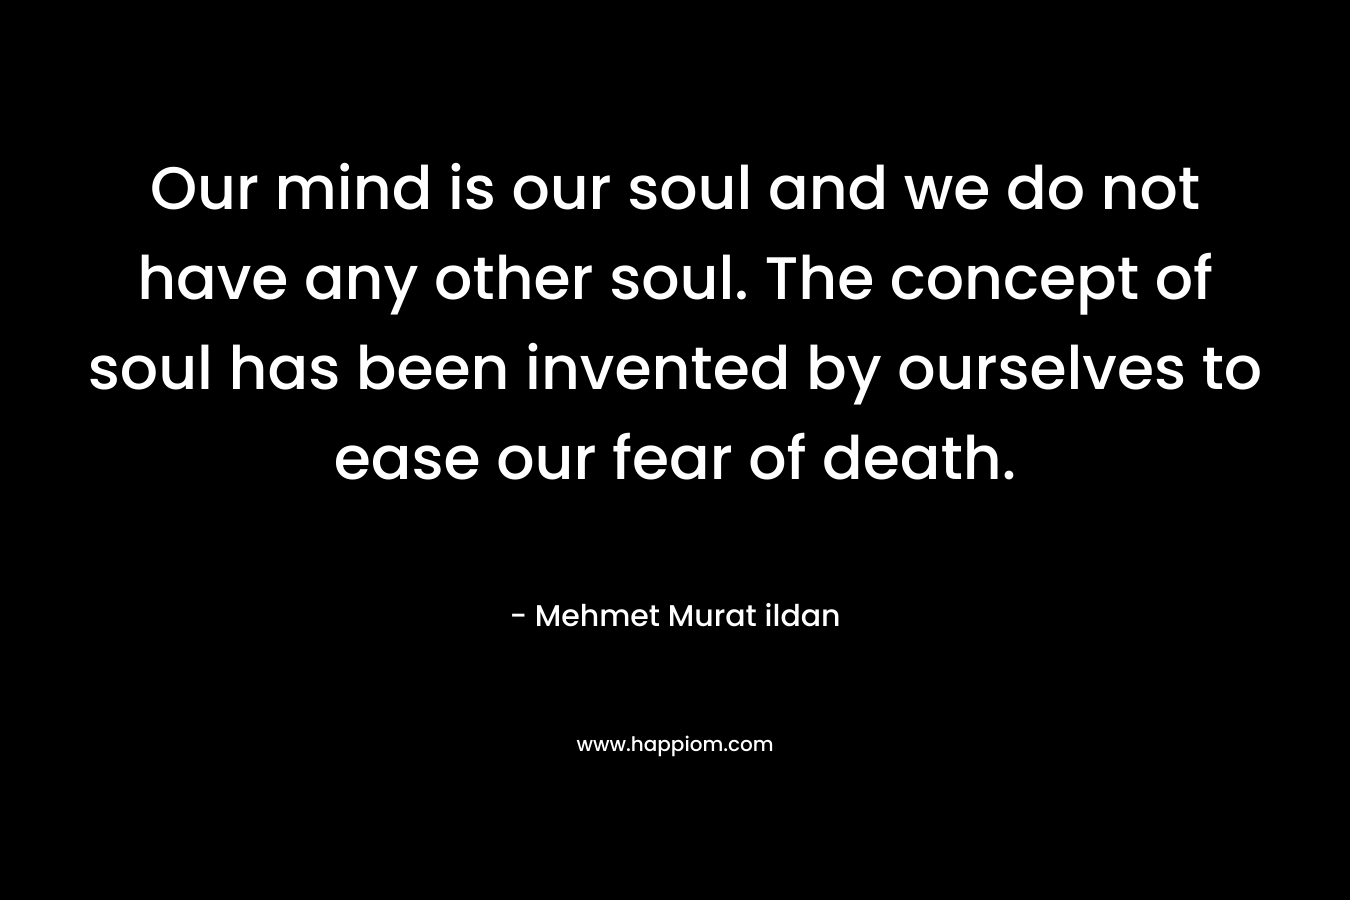 Our mind is our soul and we do not have any other soul. The concept of soul has been invented by ourselves to ease our fear of death.